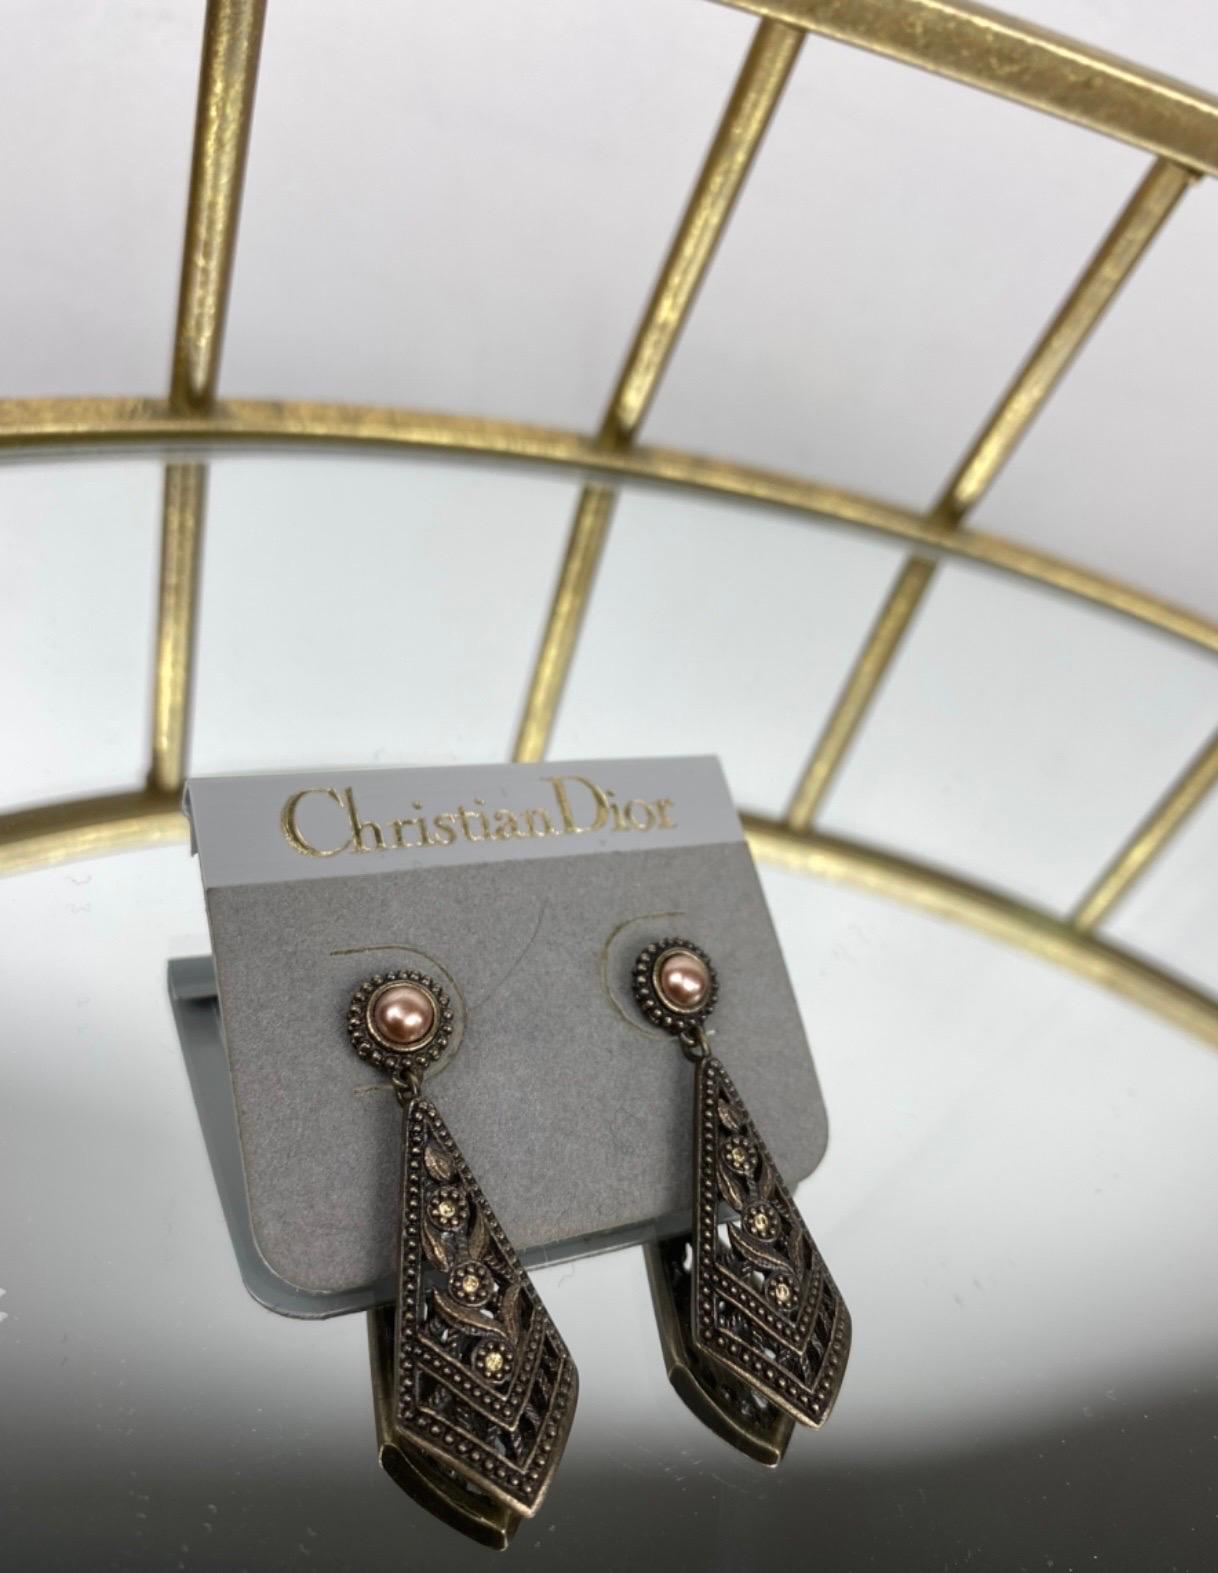 Vintage Christian Dior earrings, in bronze/silver colored metal with rose gold colored beads on the lobe. measurements: length 4cm, maximum width 1.5cm, in excellent condition. New.